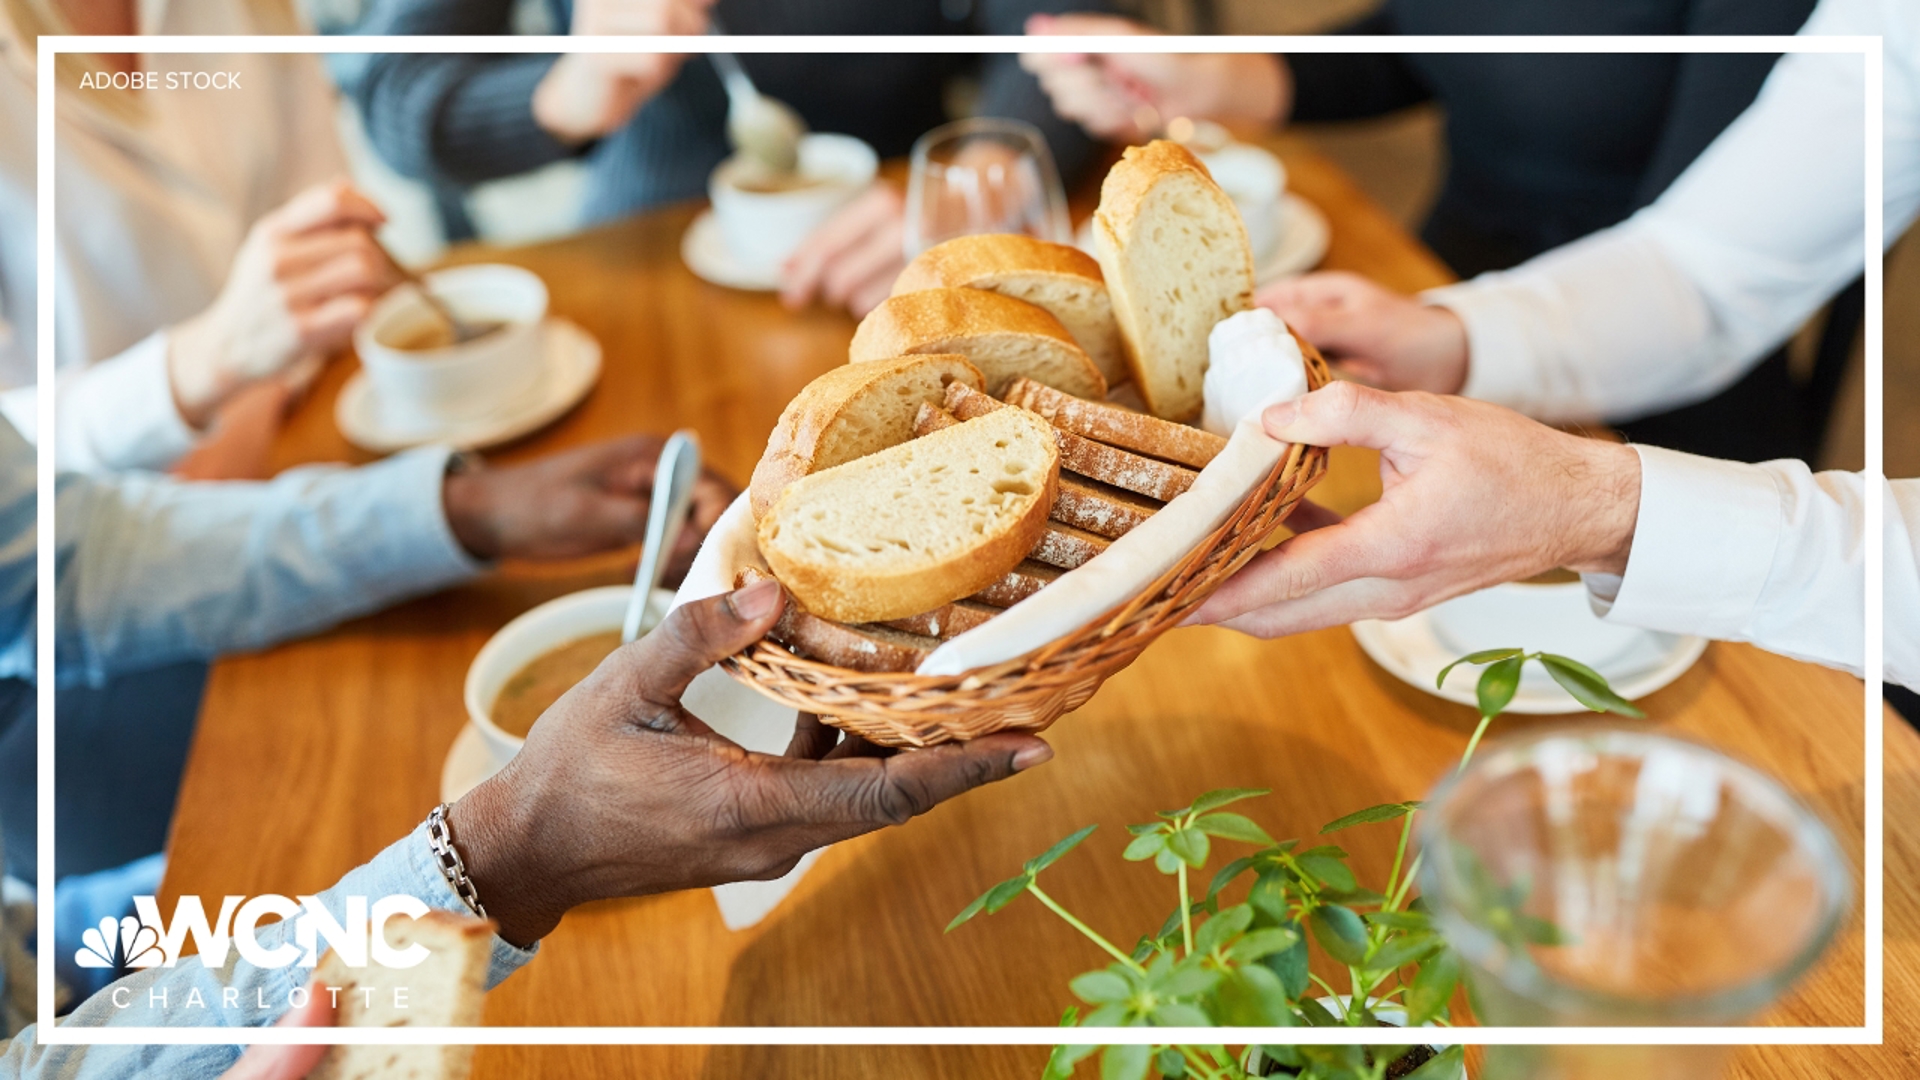 Lunch breaks are a good time to take a breather from the busy work day, but using that time at a restaurant might be a thing of the past.